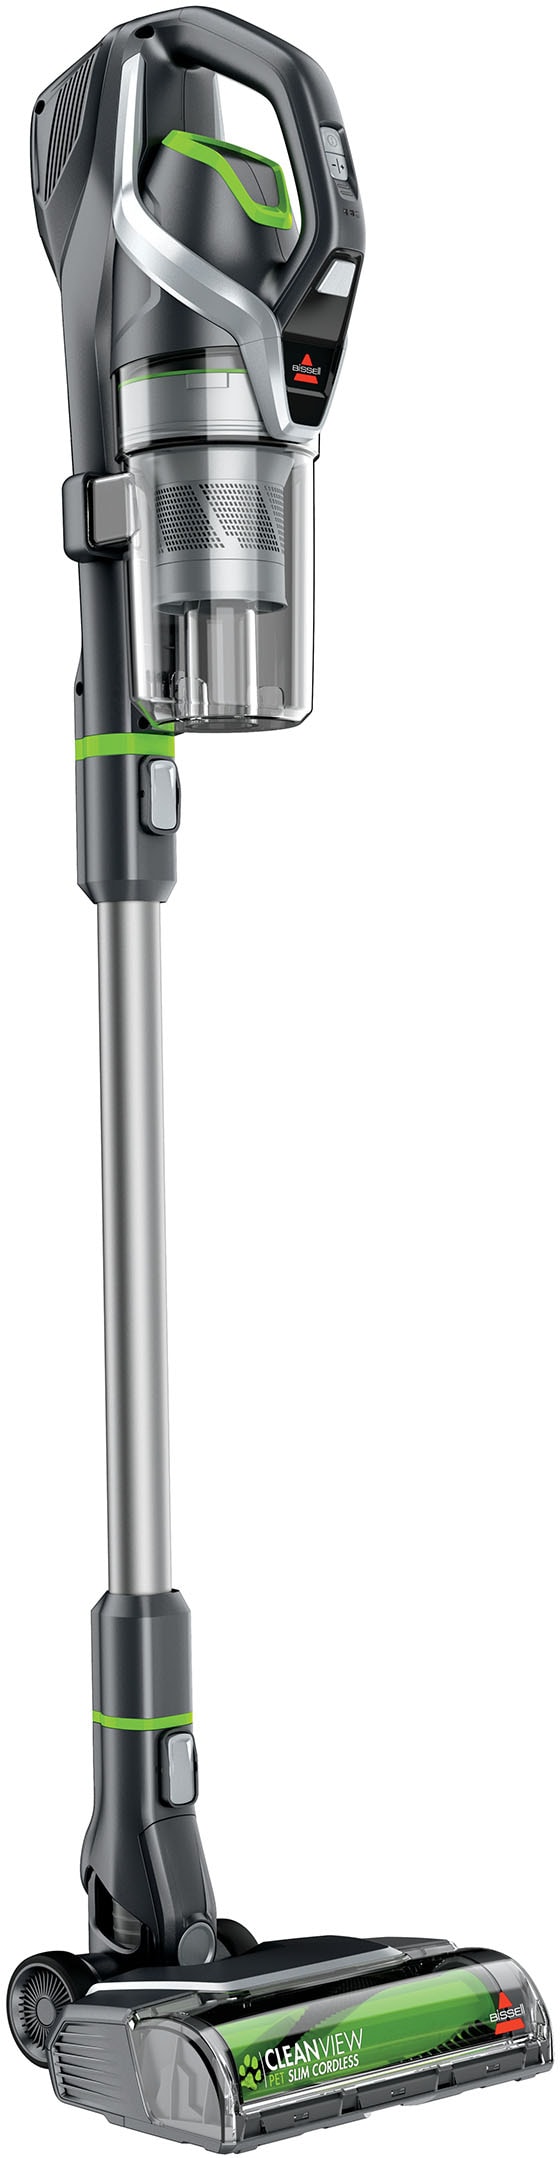 BISSELL - CleanView Pet Slim Cordless Stick Vacuum - Silver/Titanium with ChaCha Live Accents_5